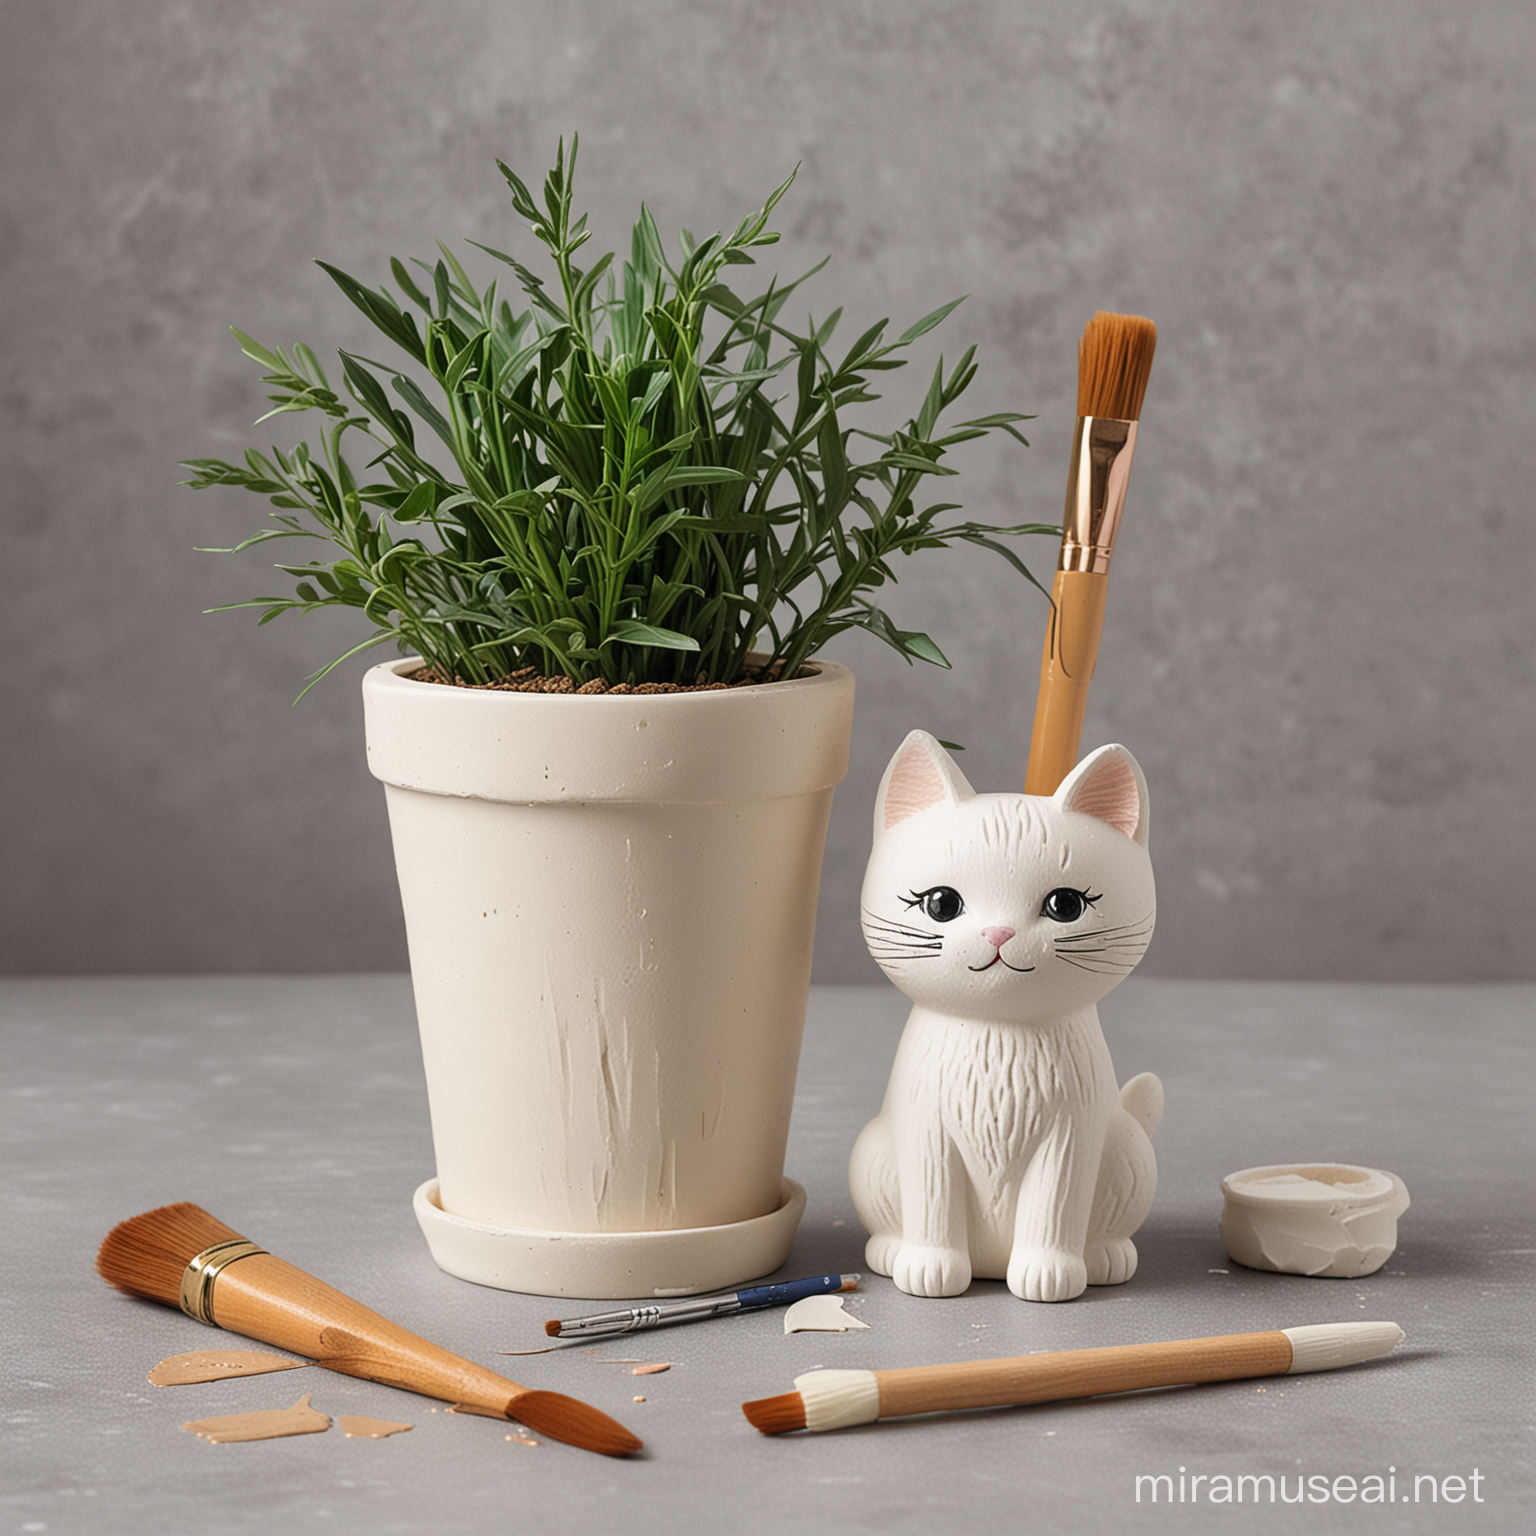 CatShaped Plaster Painting Set with Kitty Planter and Brushes